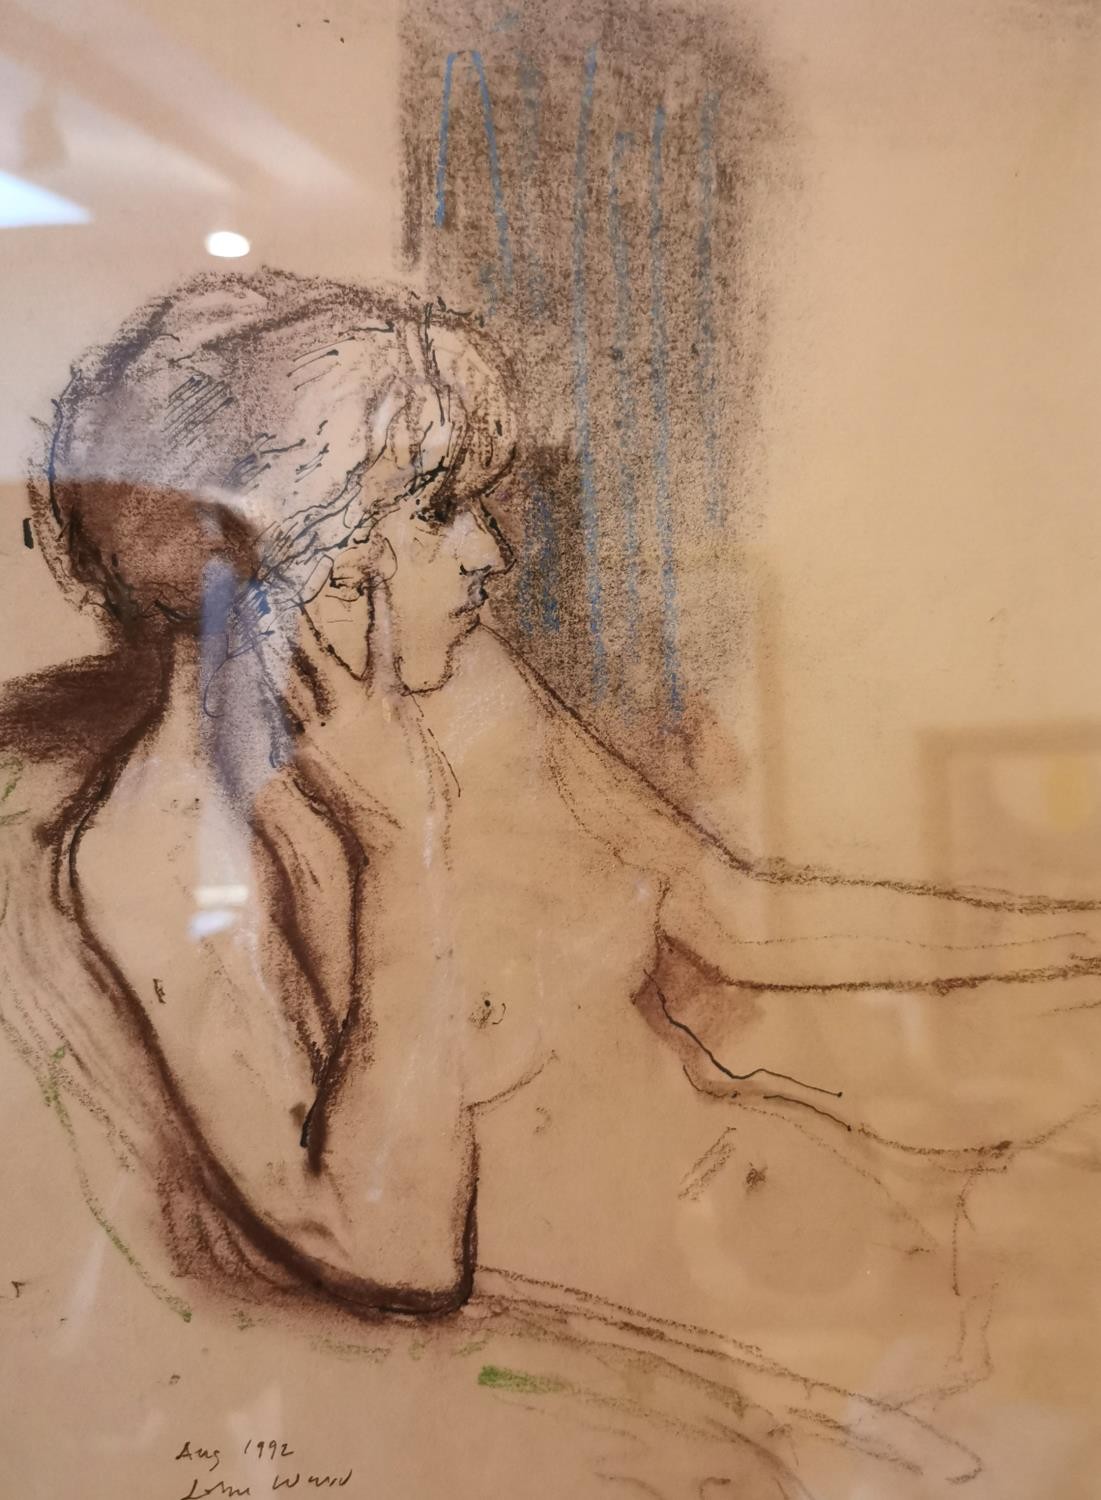 John Stanton Ward, British (1917 - 2007), pastel and ink on paper, seated nude woman in pensive